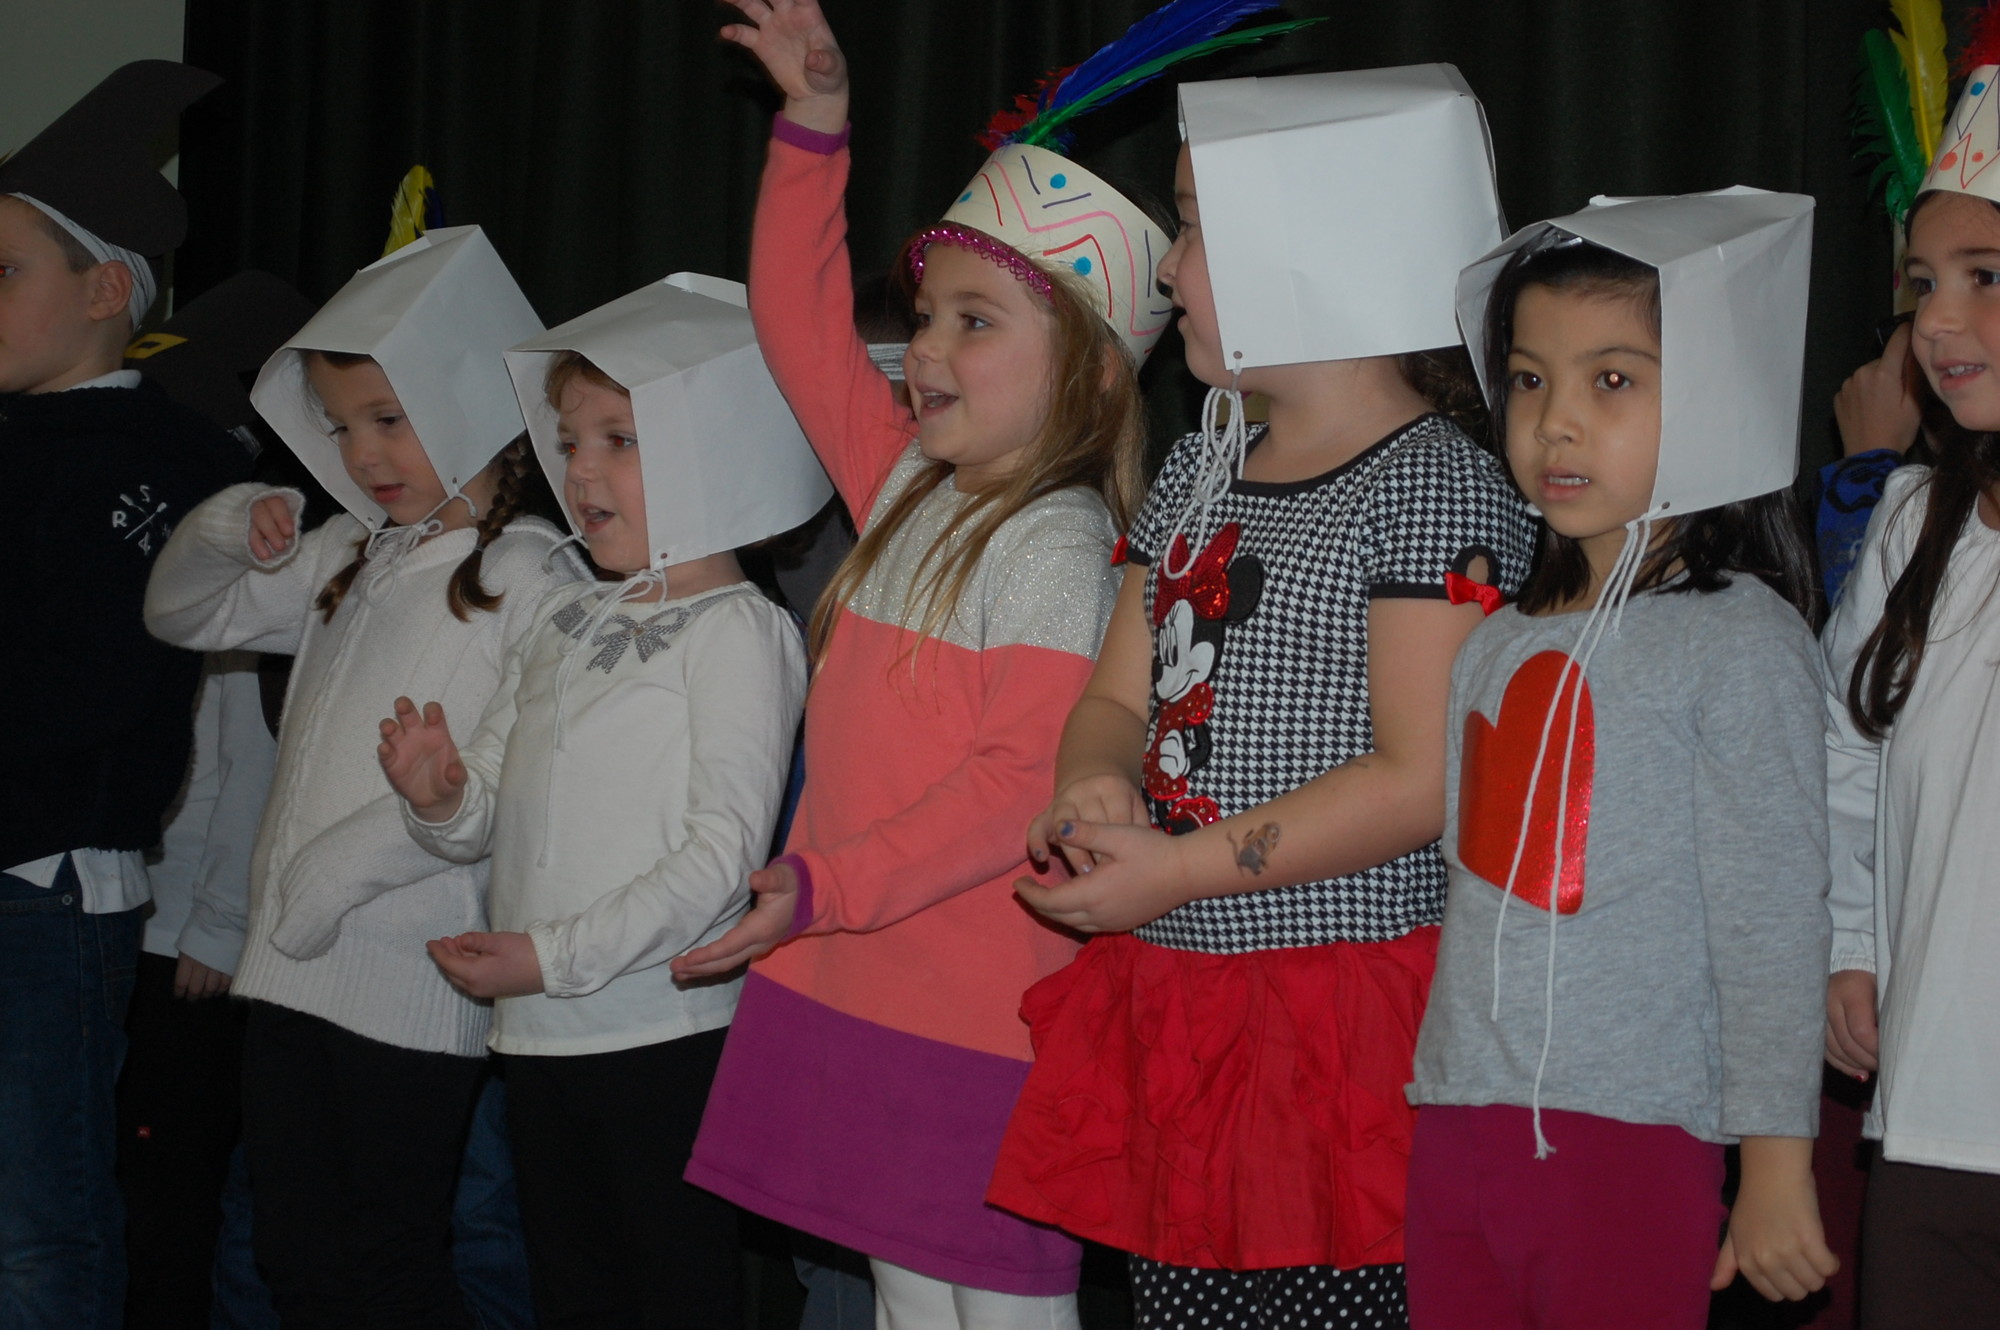 Before enjoying a feast, Lee Road School kindergarten students sang a few seasonal songs for their parents while dressed as Pilgrims and Native Americans.